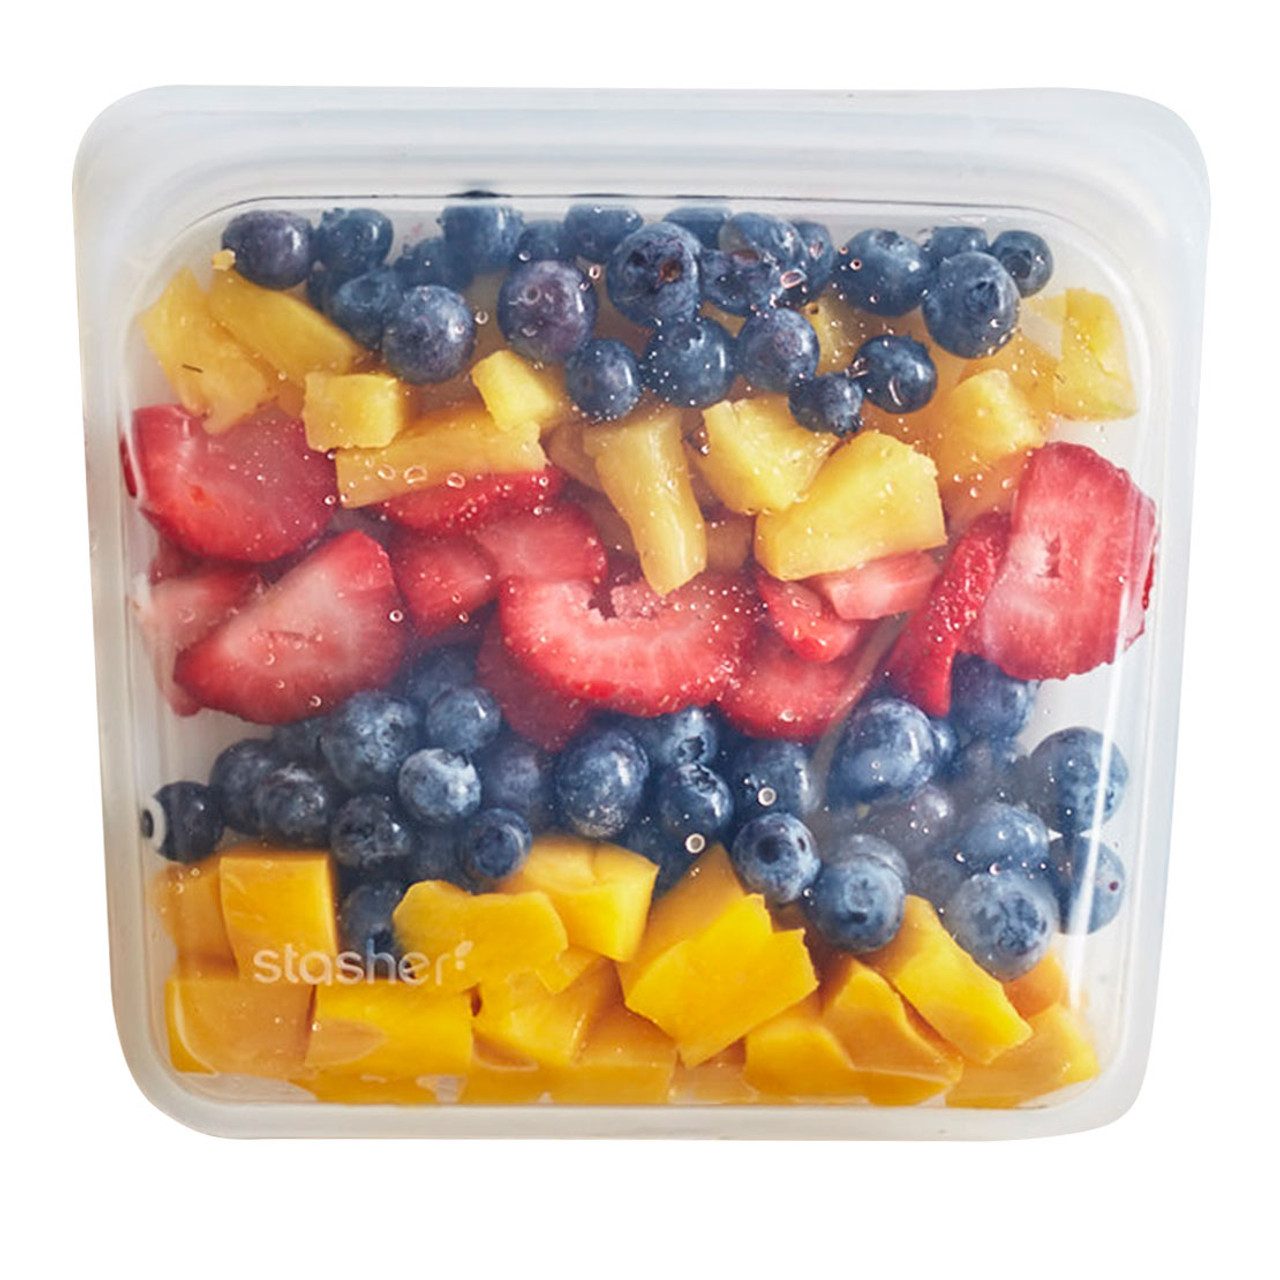 https://cdn11.bigcommerce.com/s-j602wc6a/images/stencil/1280x1280/products/7233/25425/STSB00-Stasher-Sandwich-Bag-Clear-Fruit__09249.1541806523.jpg?c=2